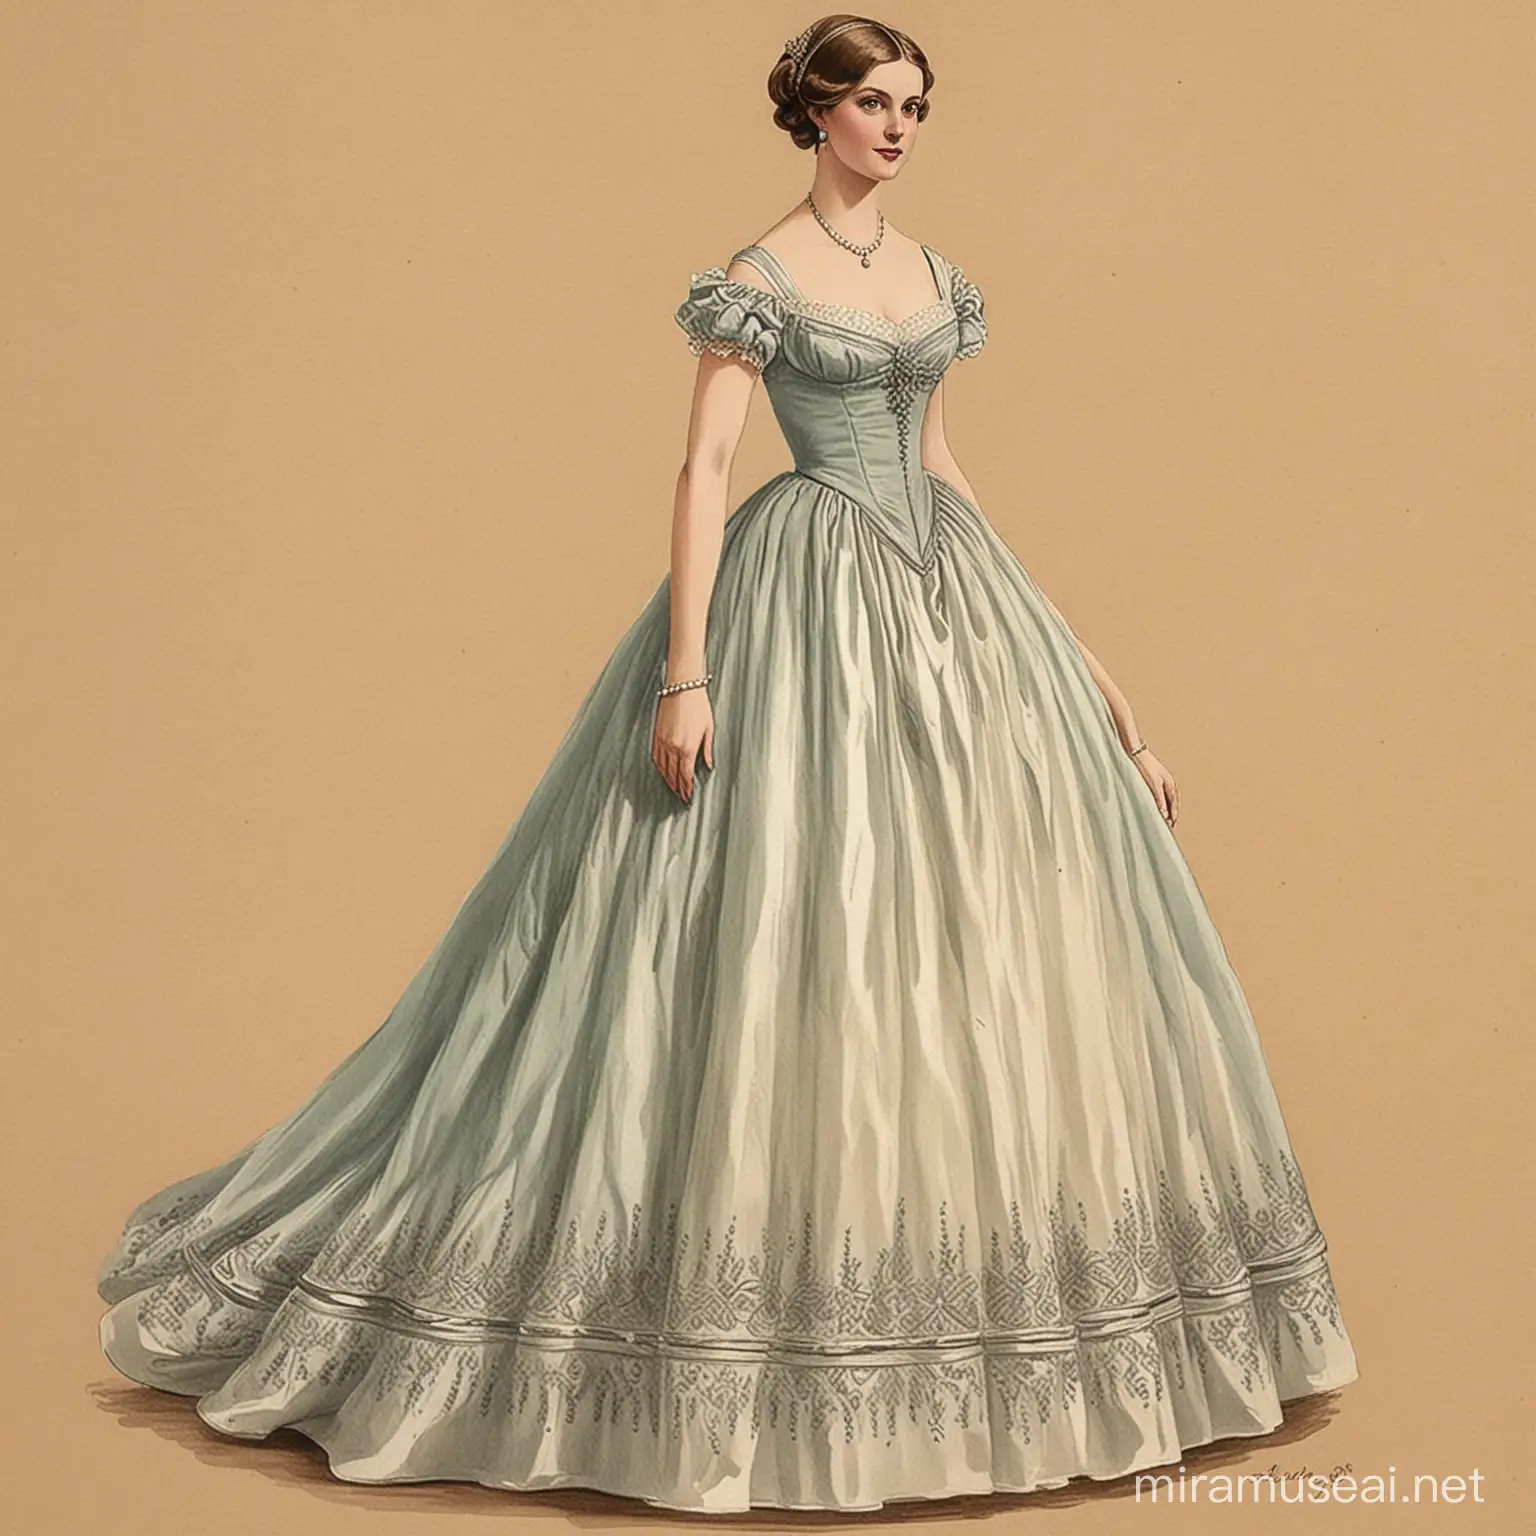 a drawing of an 1800's ladies empire line ballgown, vintage painting